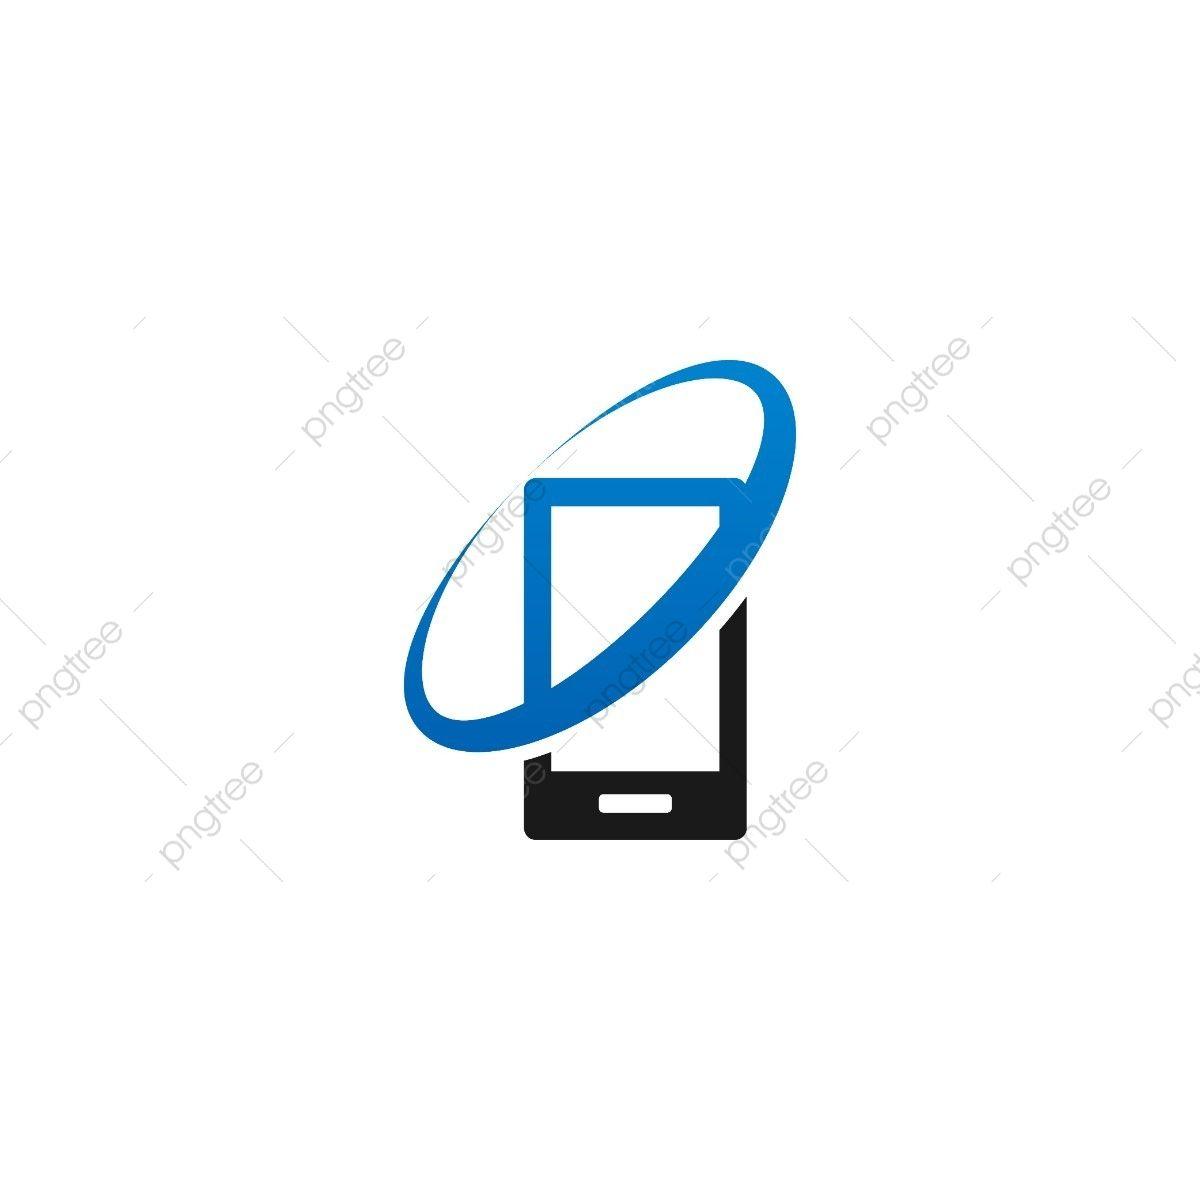 Celular Logo - Abstract Mobile Phone Logo And Icon Design Template, Android, Mobile ...